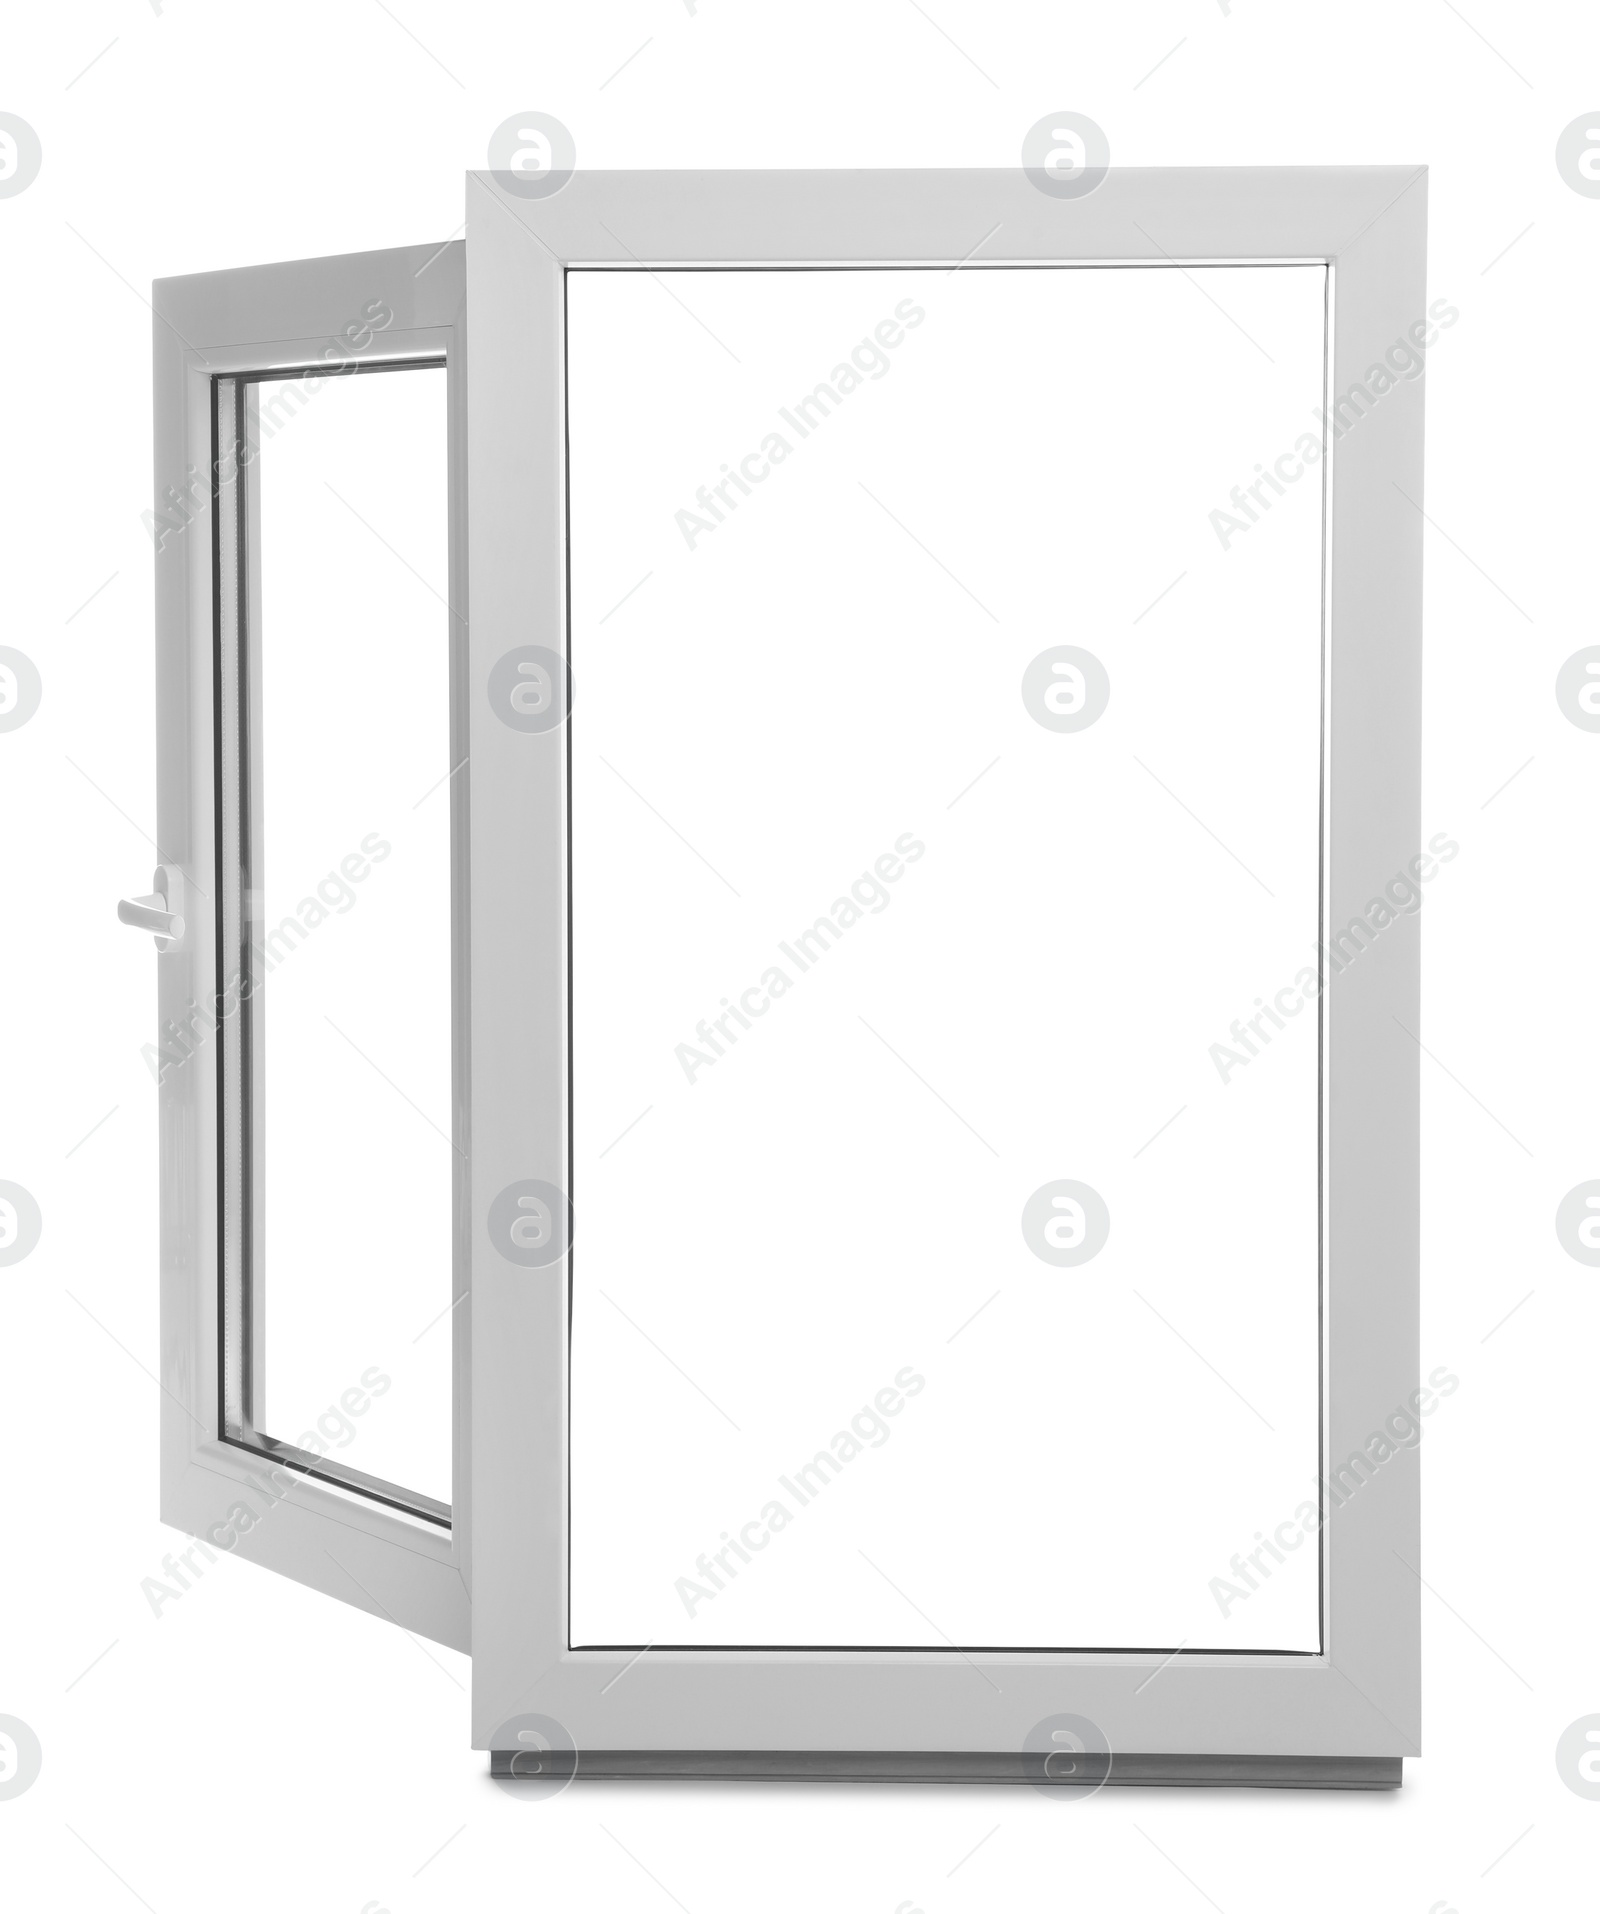 Photo of New modern single casement window isolated on white